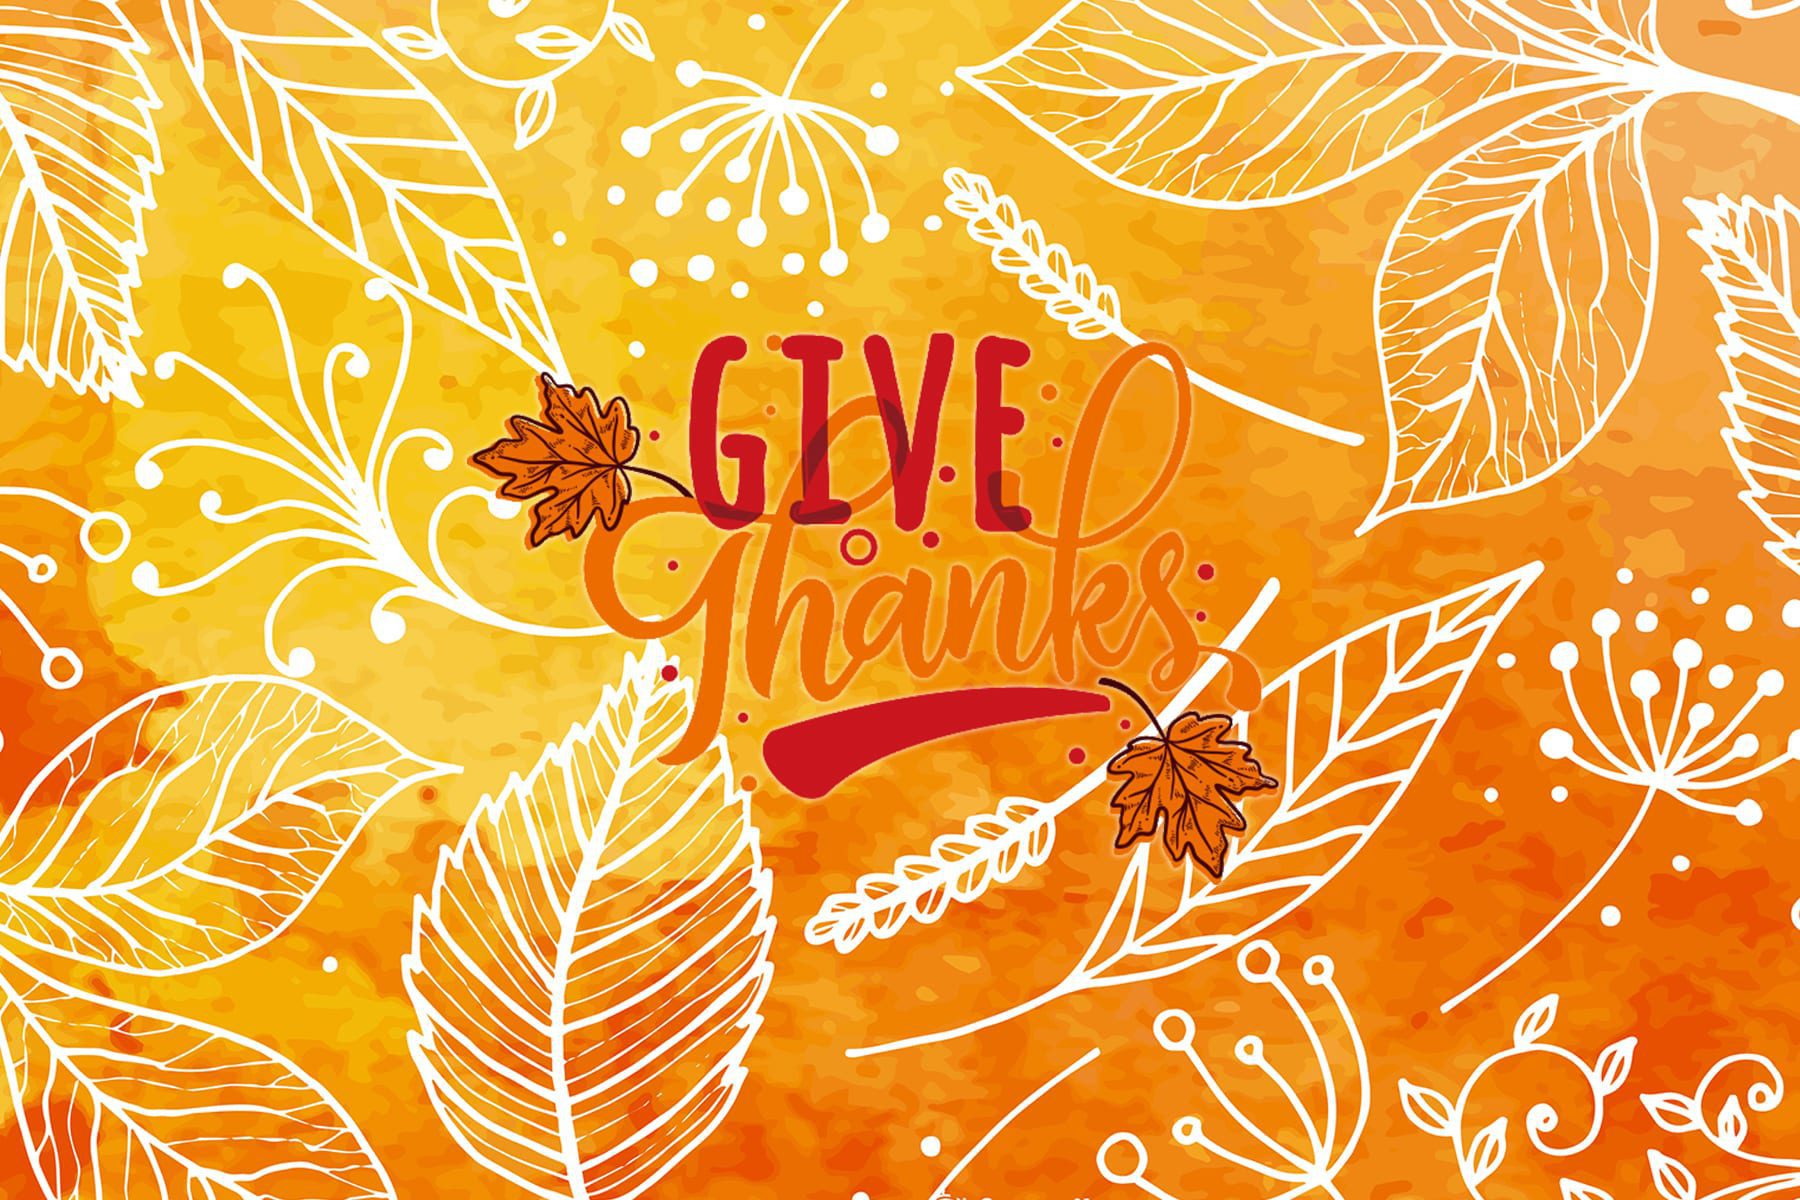 Free Download – Give Thanks with CocoPolka Photo Albums!